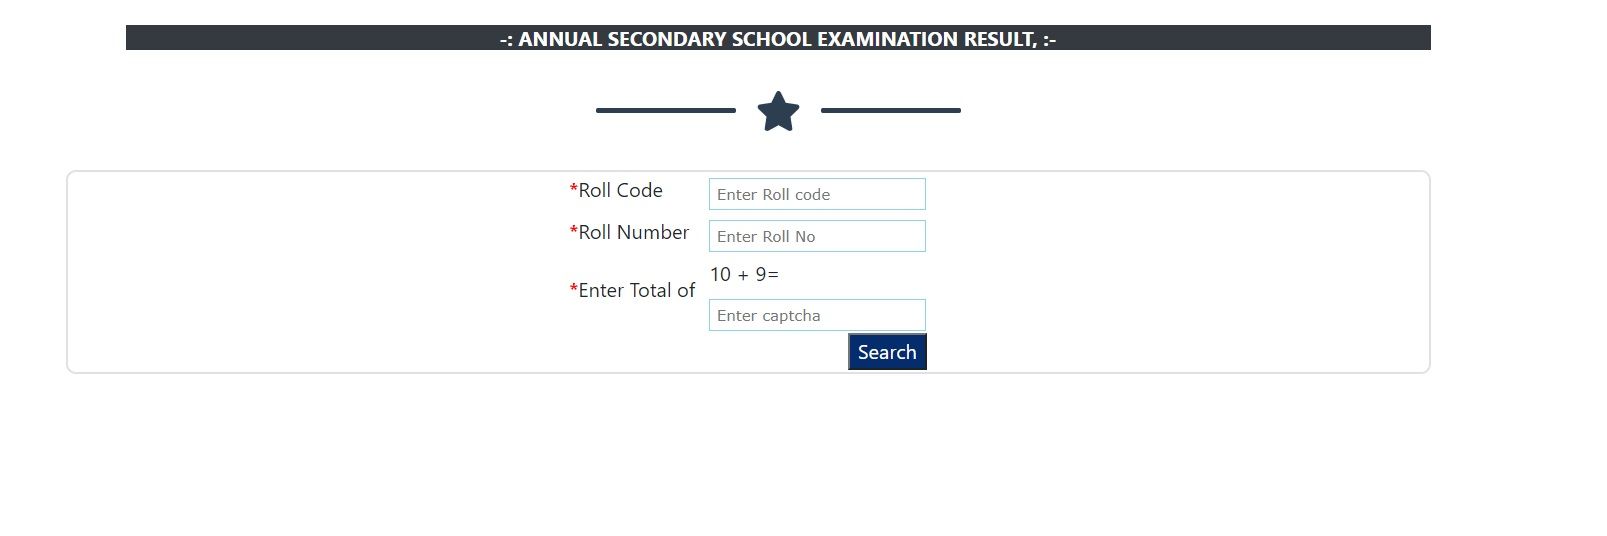 BSEB to Declare Matric Results Shortly, Official Website Showing Error